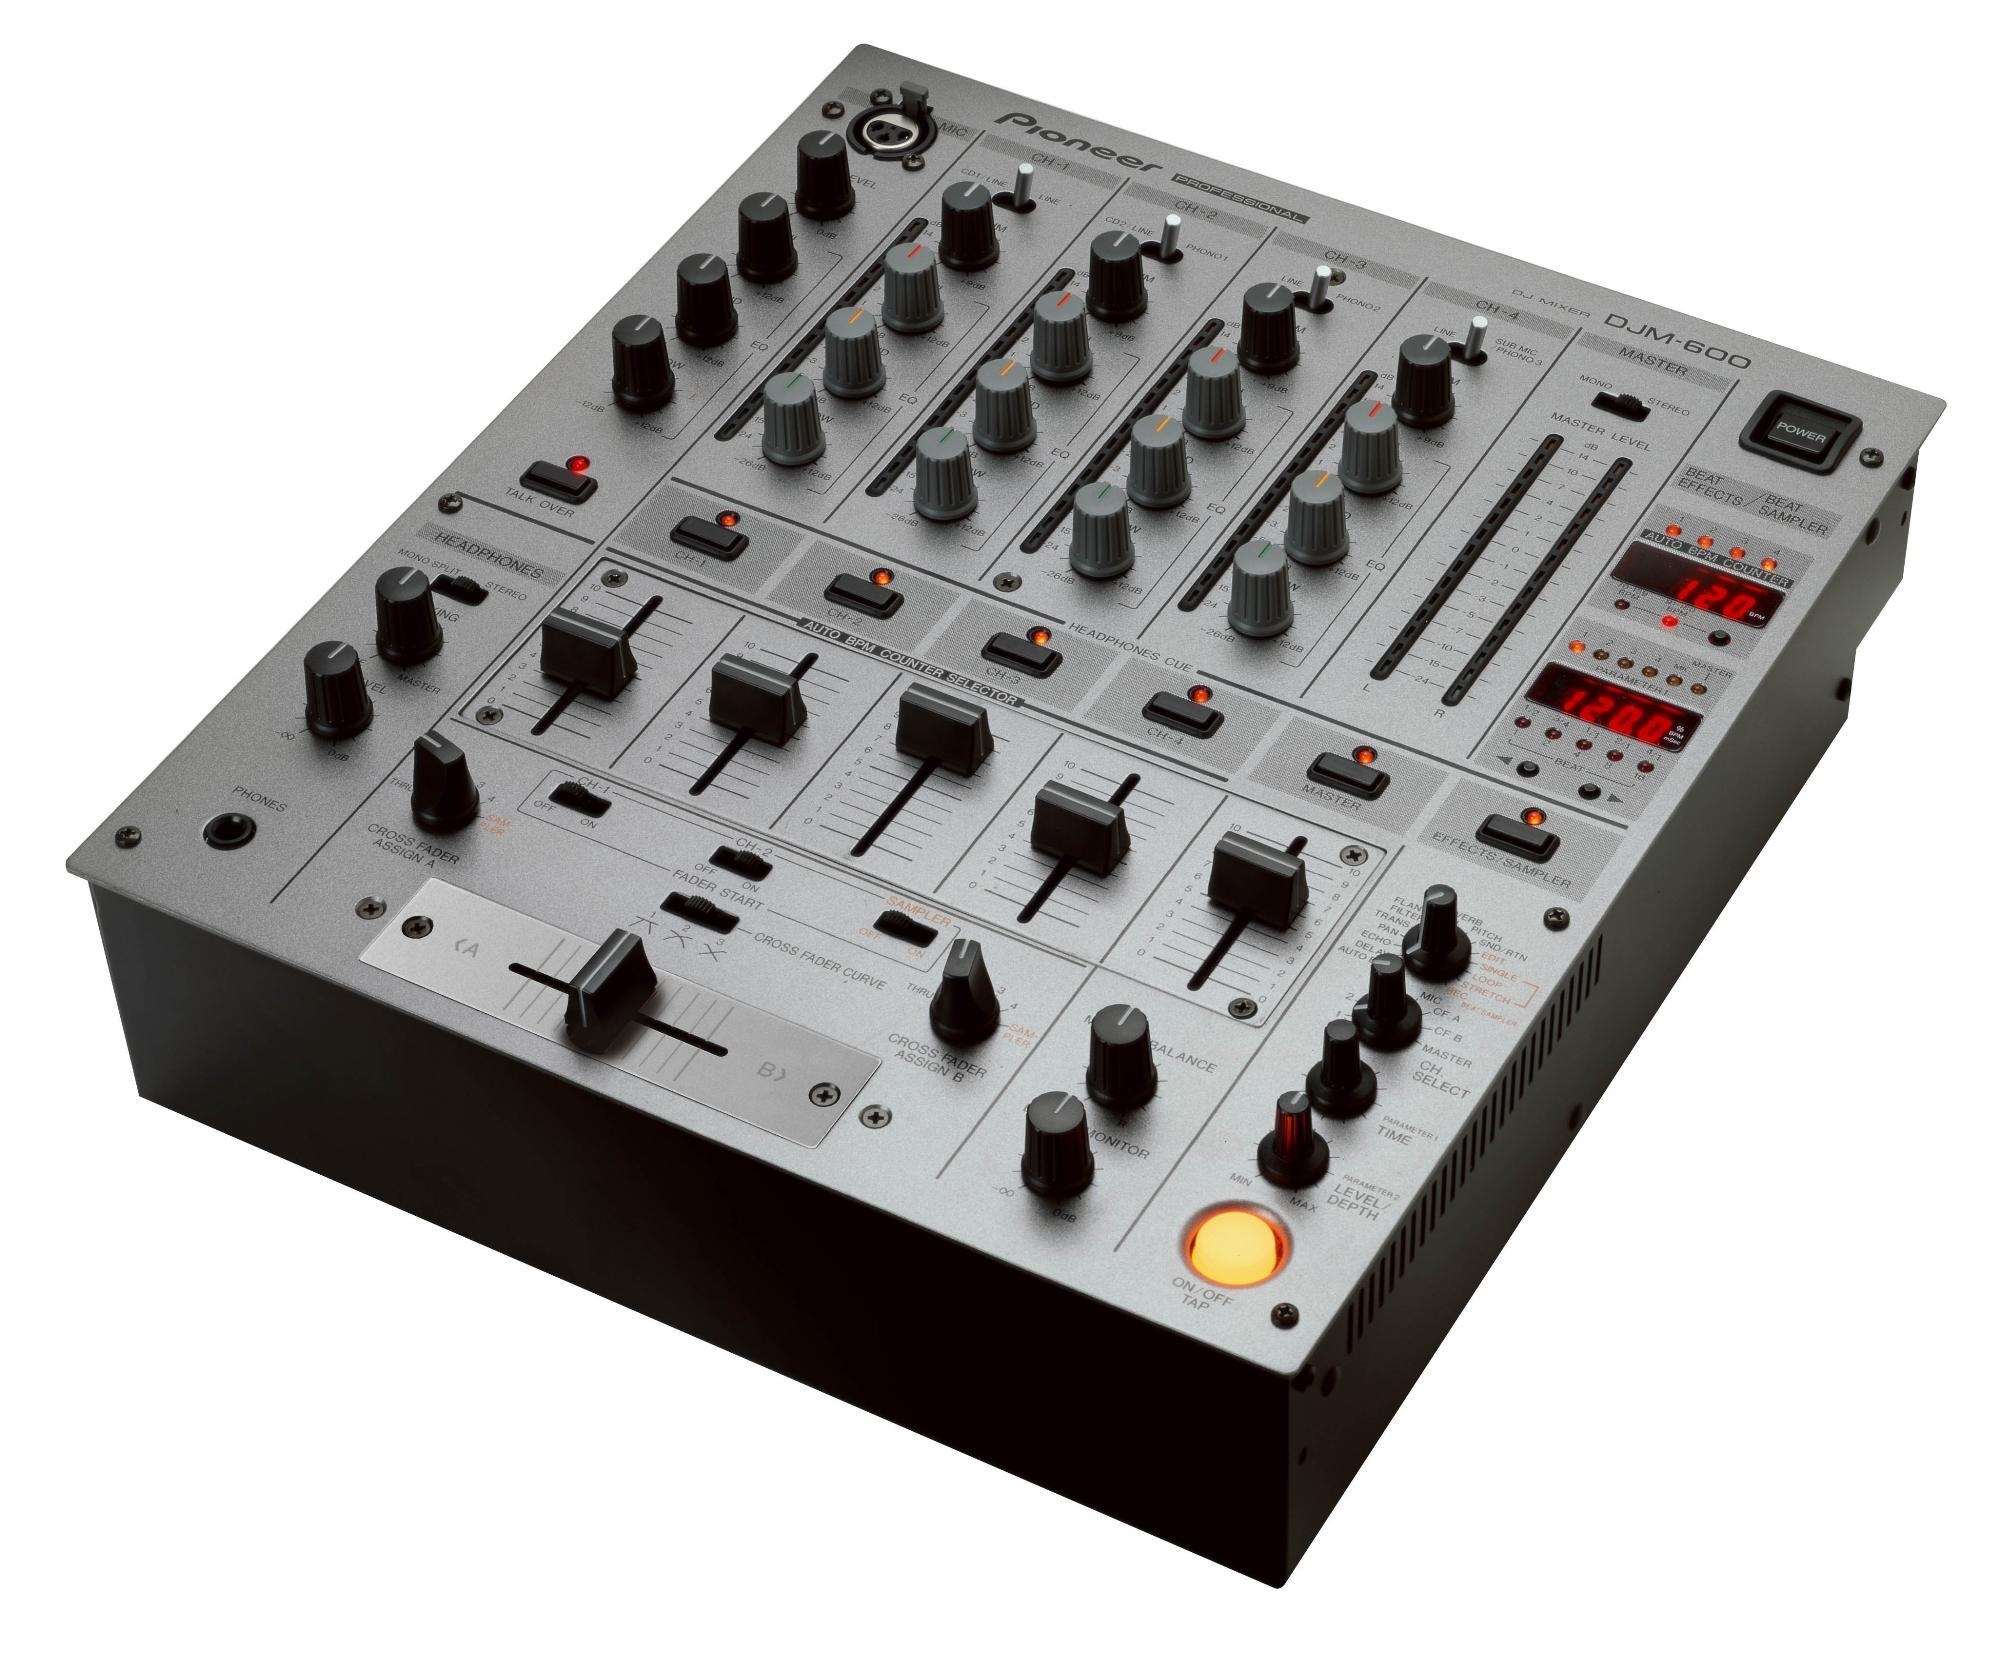 Used DJ Mixer for sale in bangalore